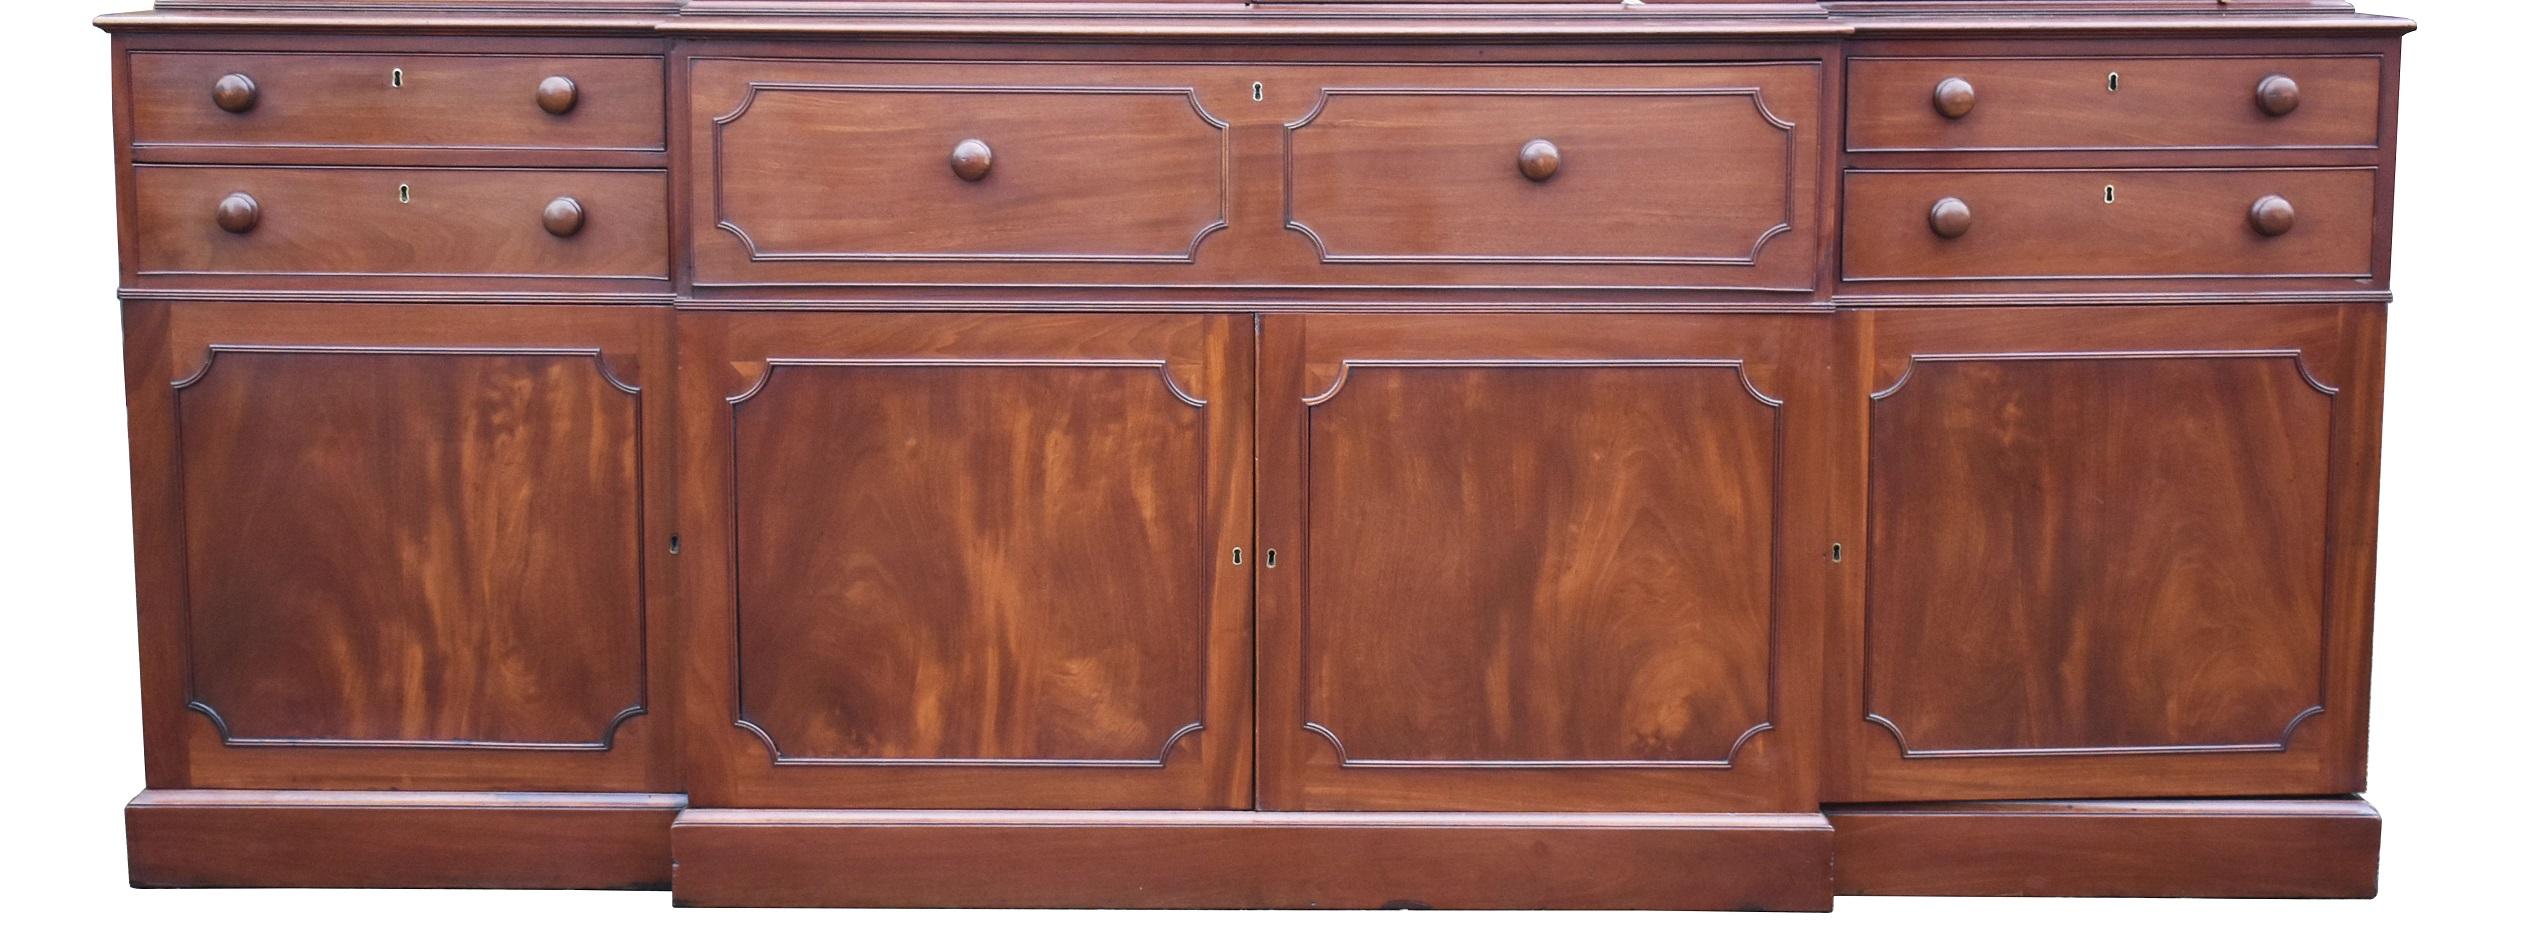 English George III Mahogany Secretaire Breakfront Bookcase In Good Condition For Sale In Chelmsford, Essex